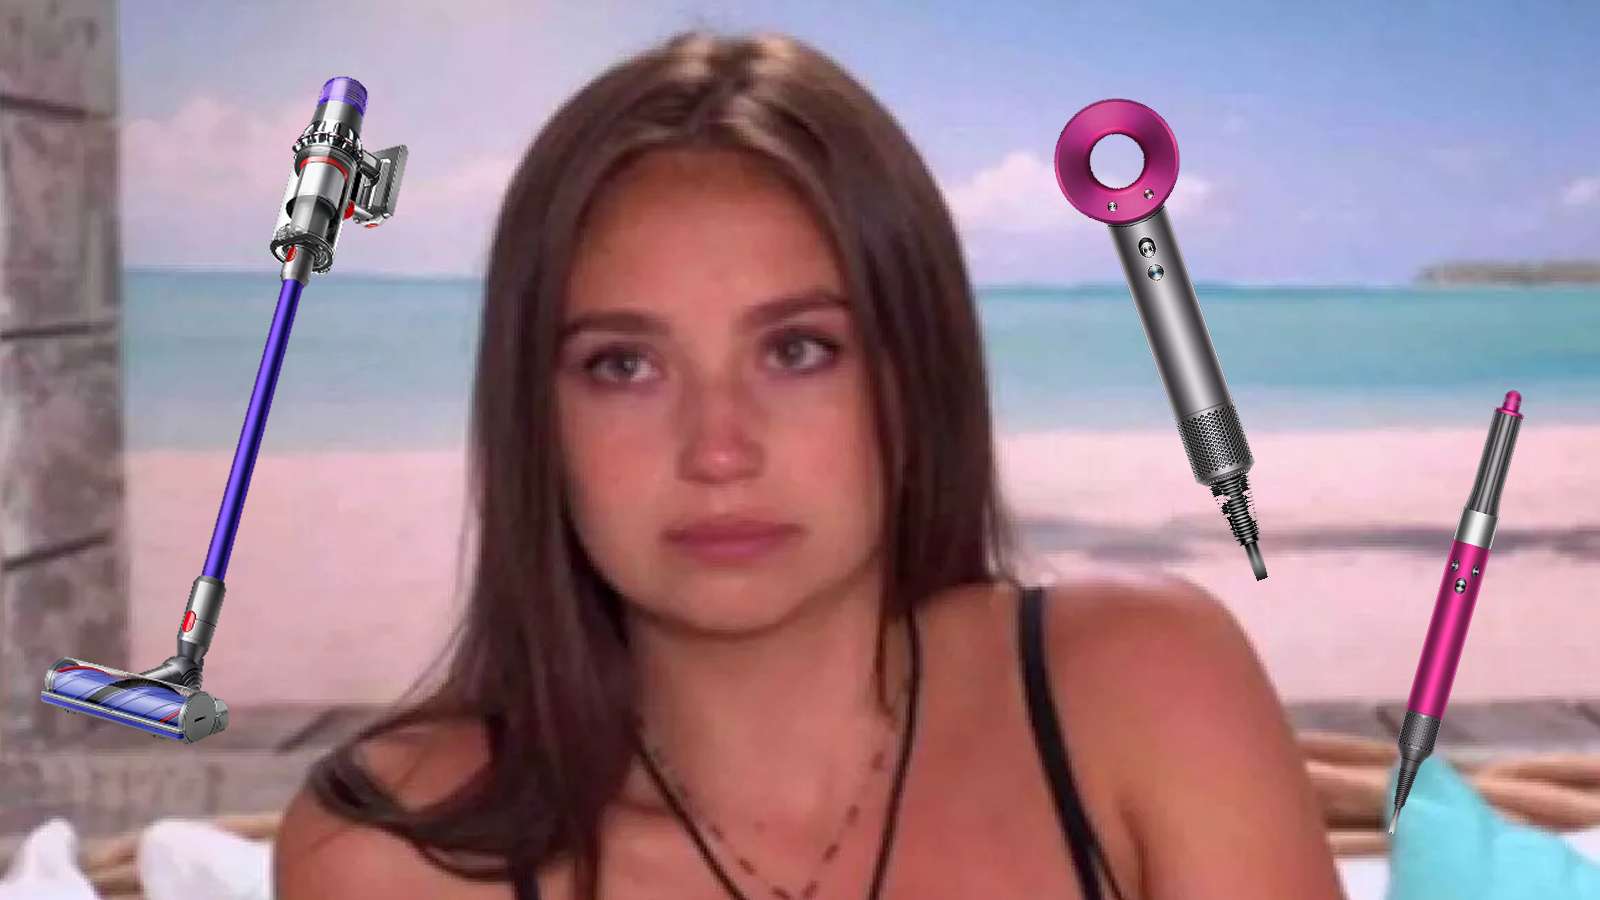 Love Island’s Amber Wise reveals she still has valuables in the villa after dumping